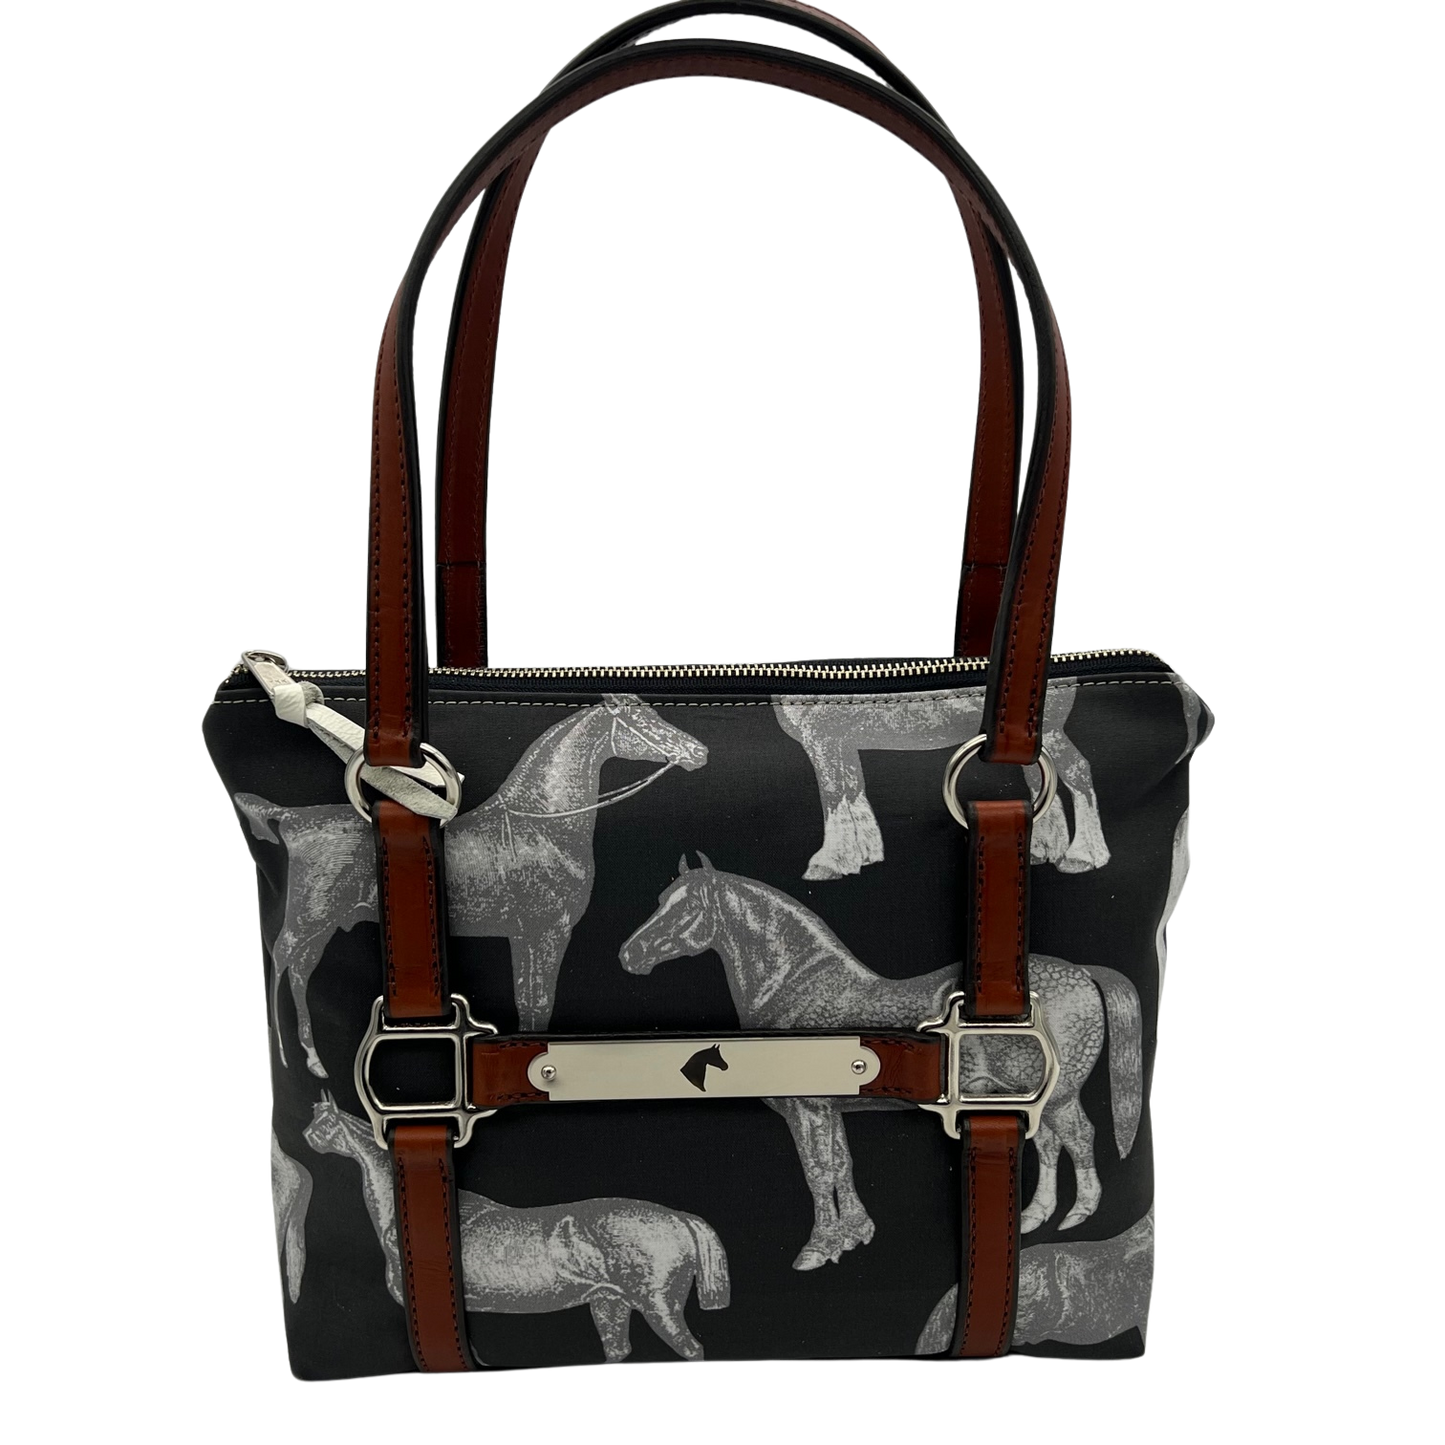 Stable Satchel in Equus - 3 color options